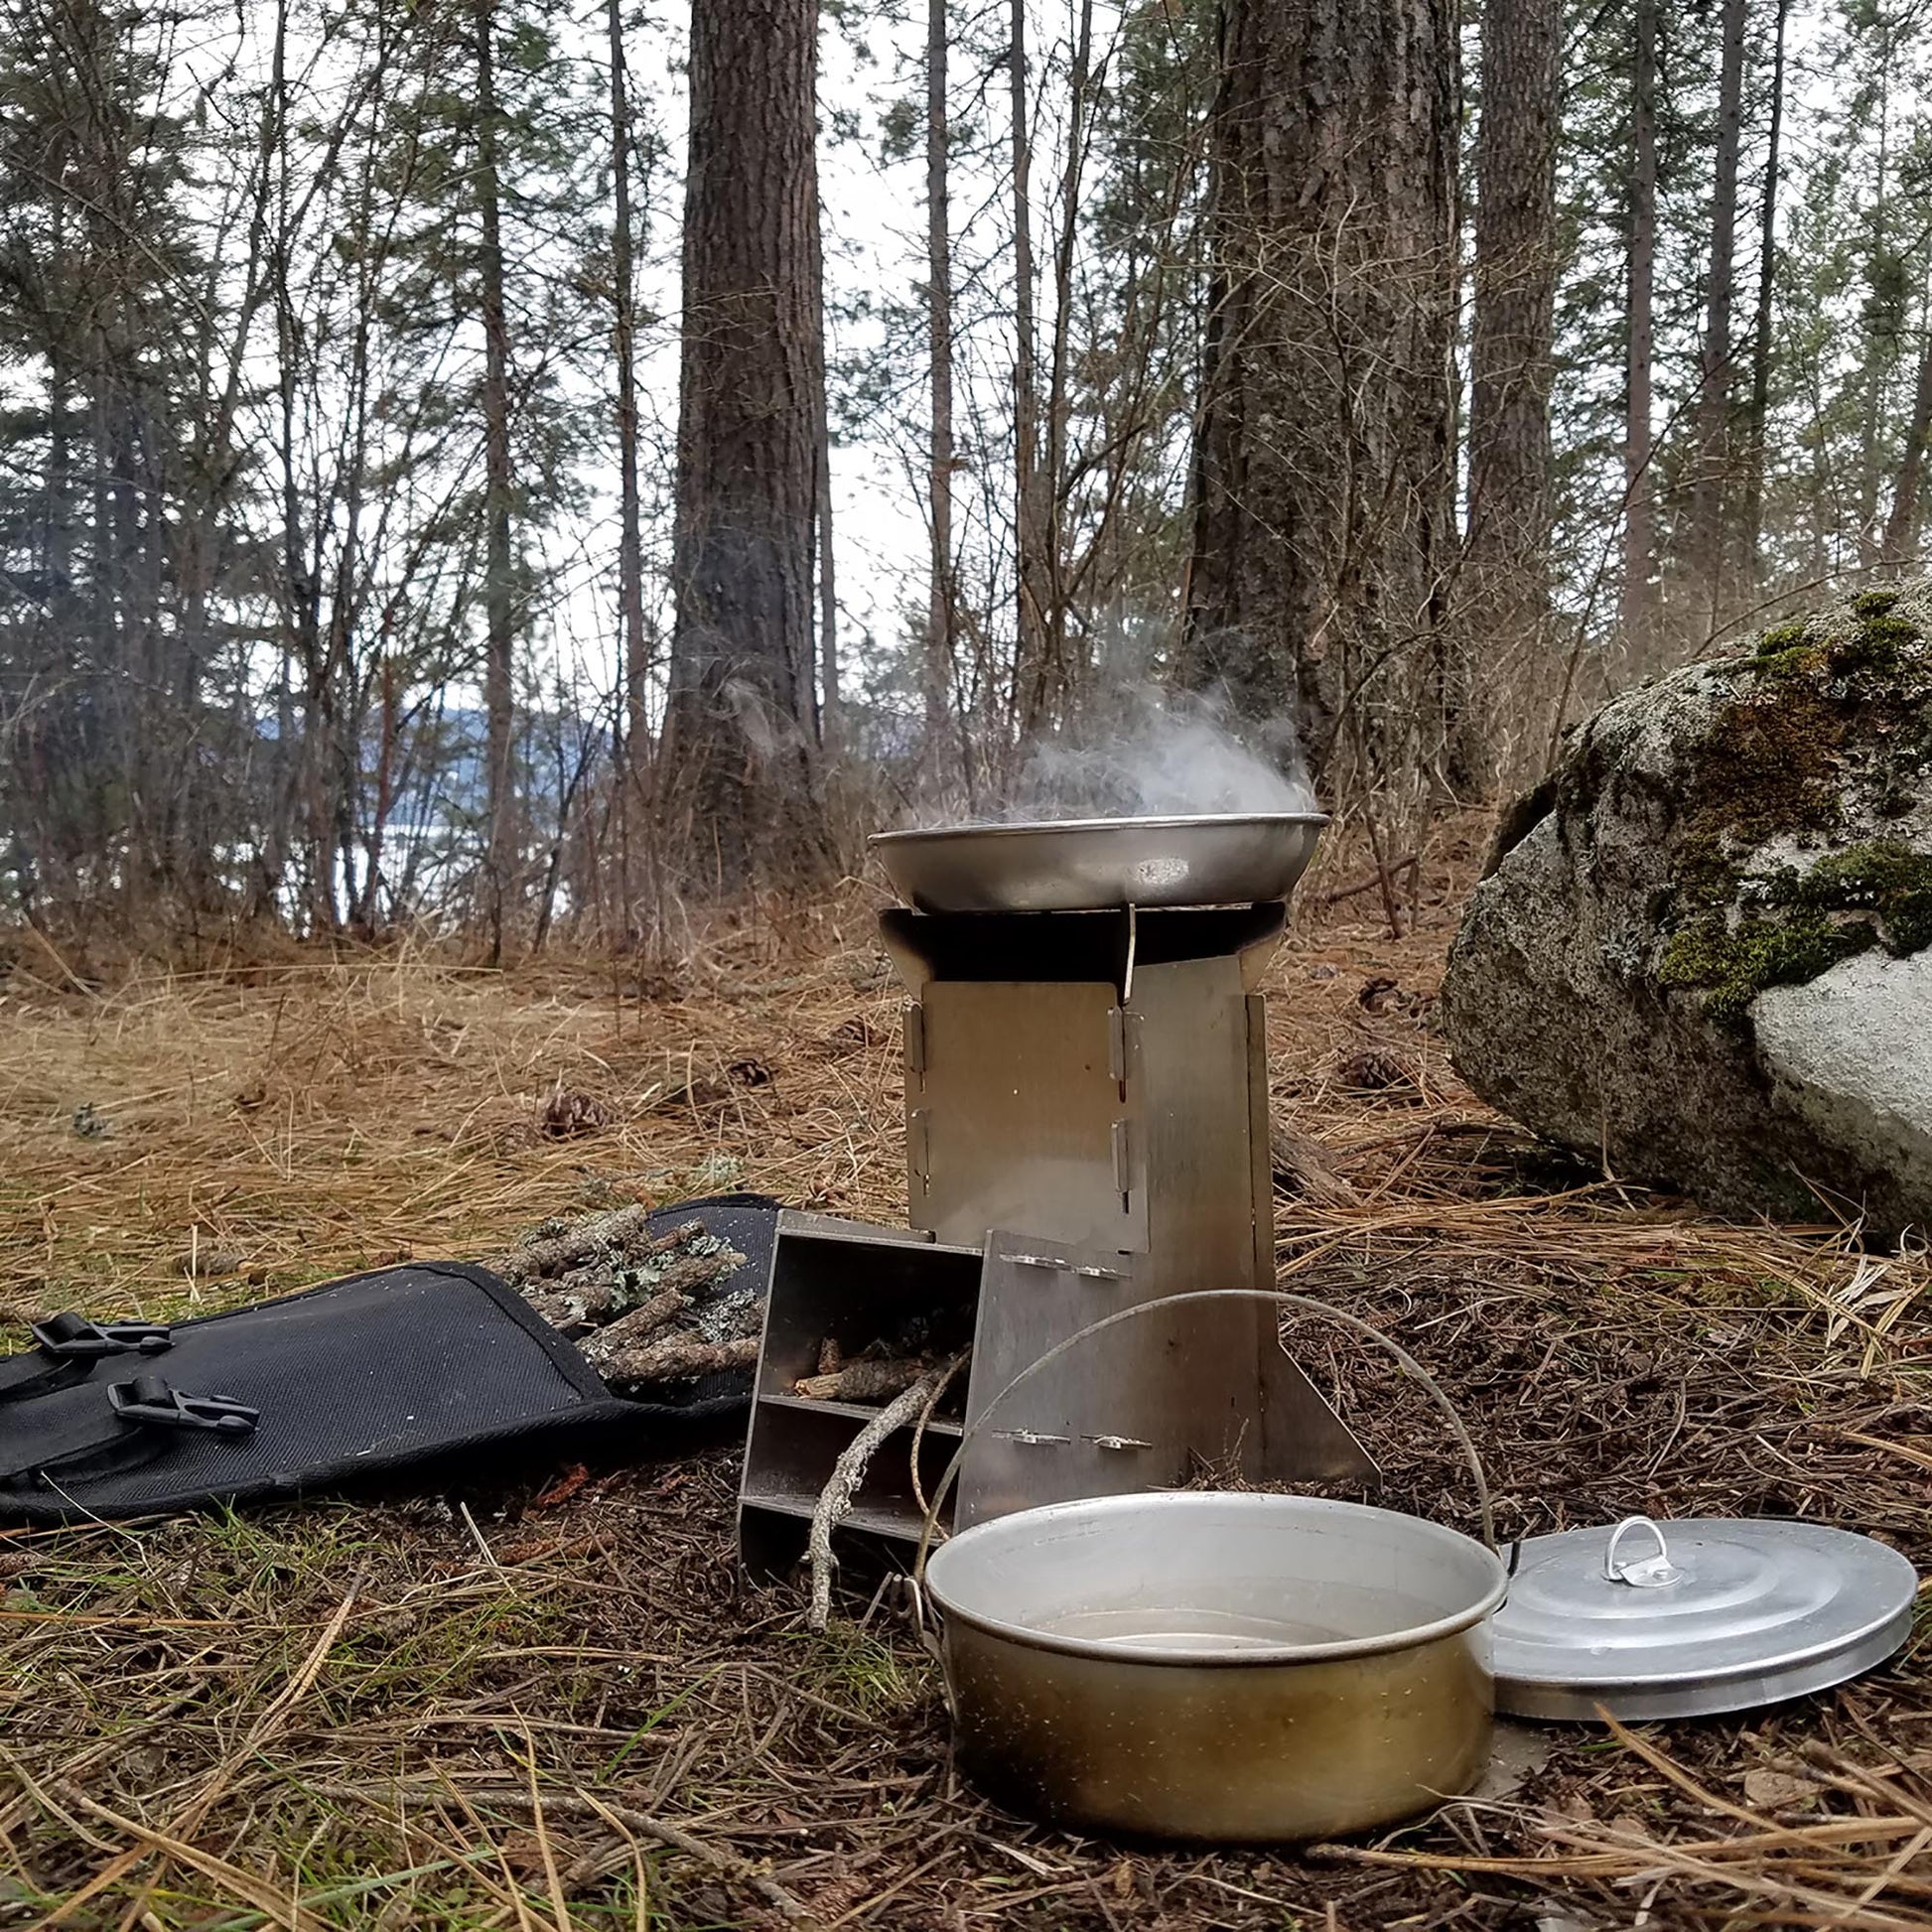 rocket stove for camping, hiking, backpacking, hunting and wilderness survival.  